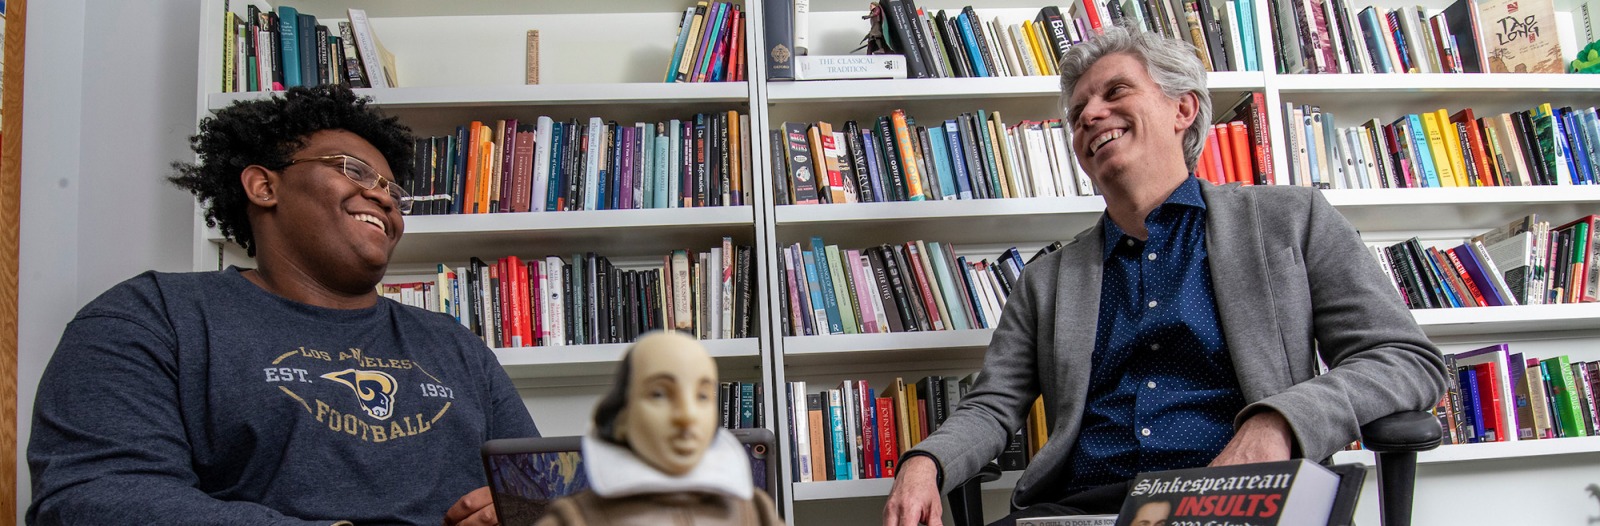 Professor Garrison and student in office with toy Shakespeare figure in foreground